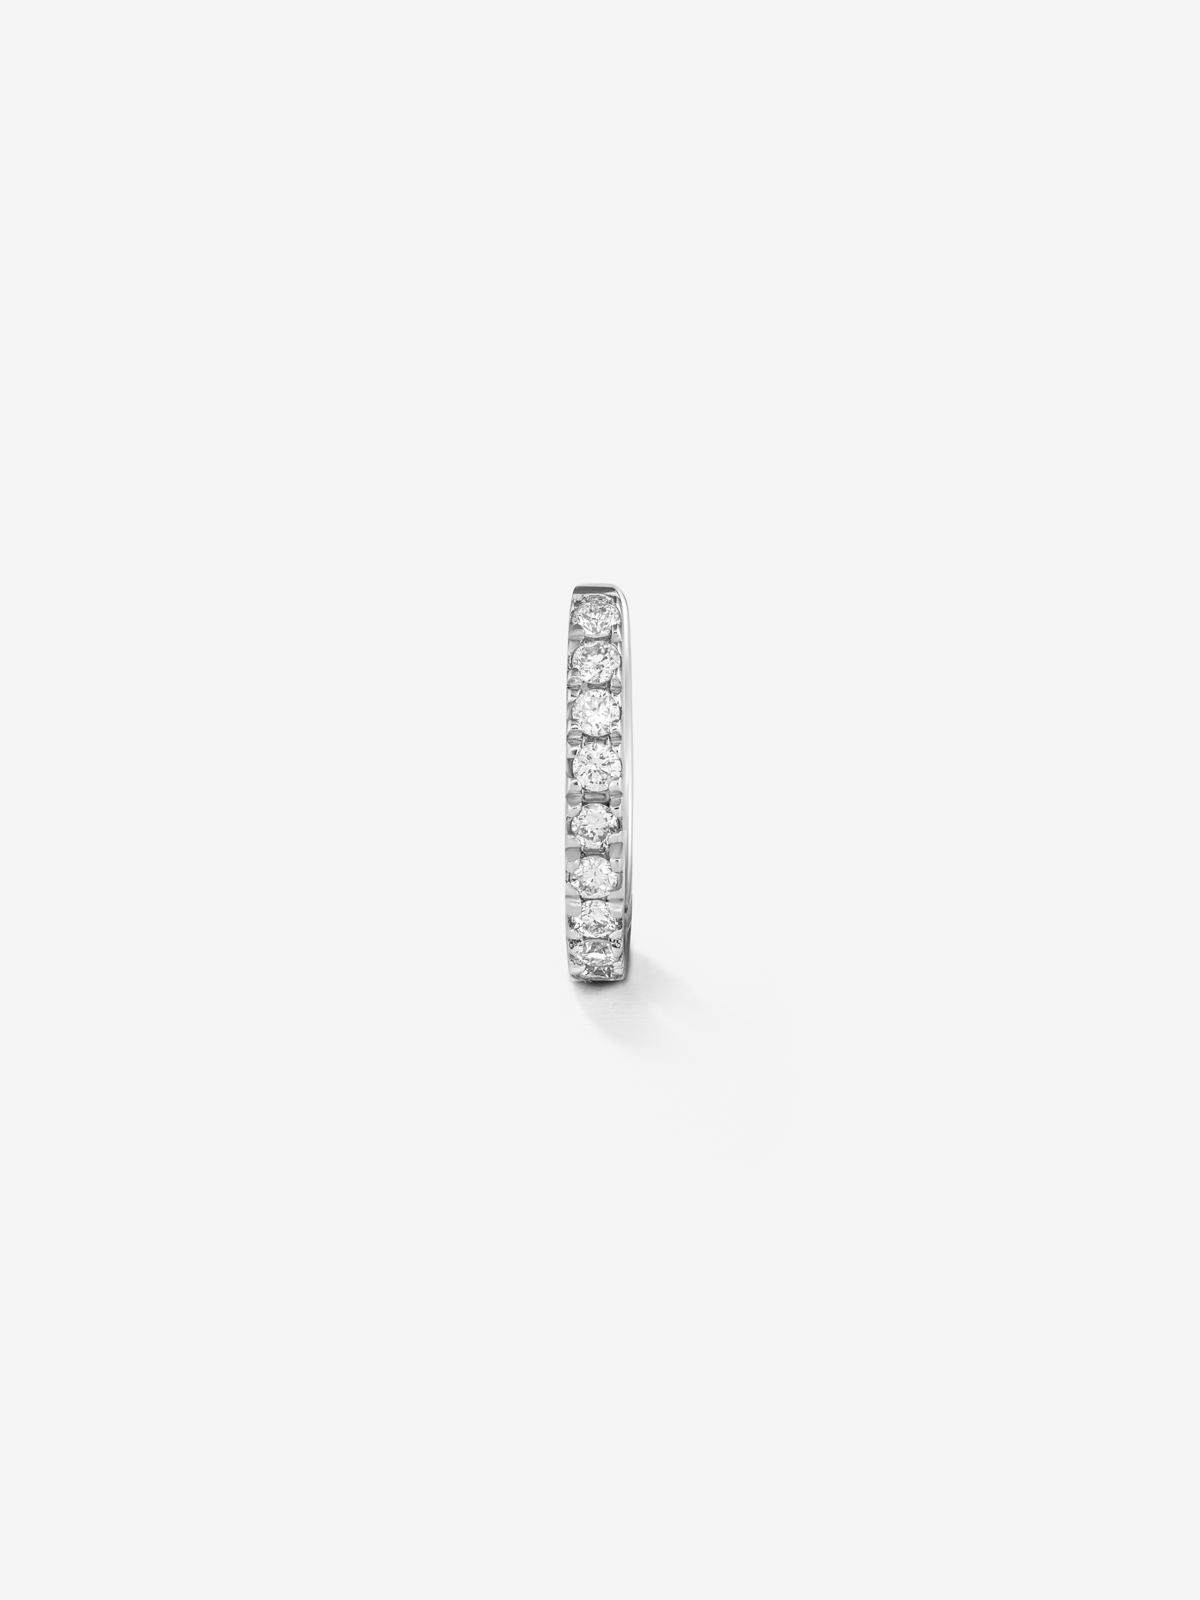 Individual 18K white gold hoop earring with diamonds